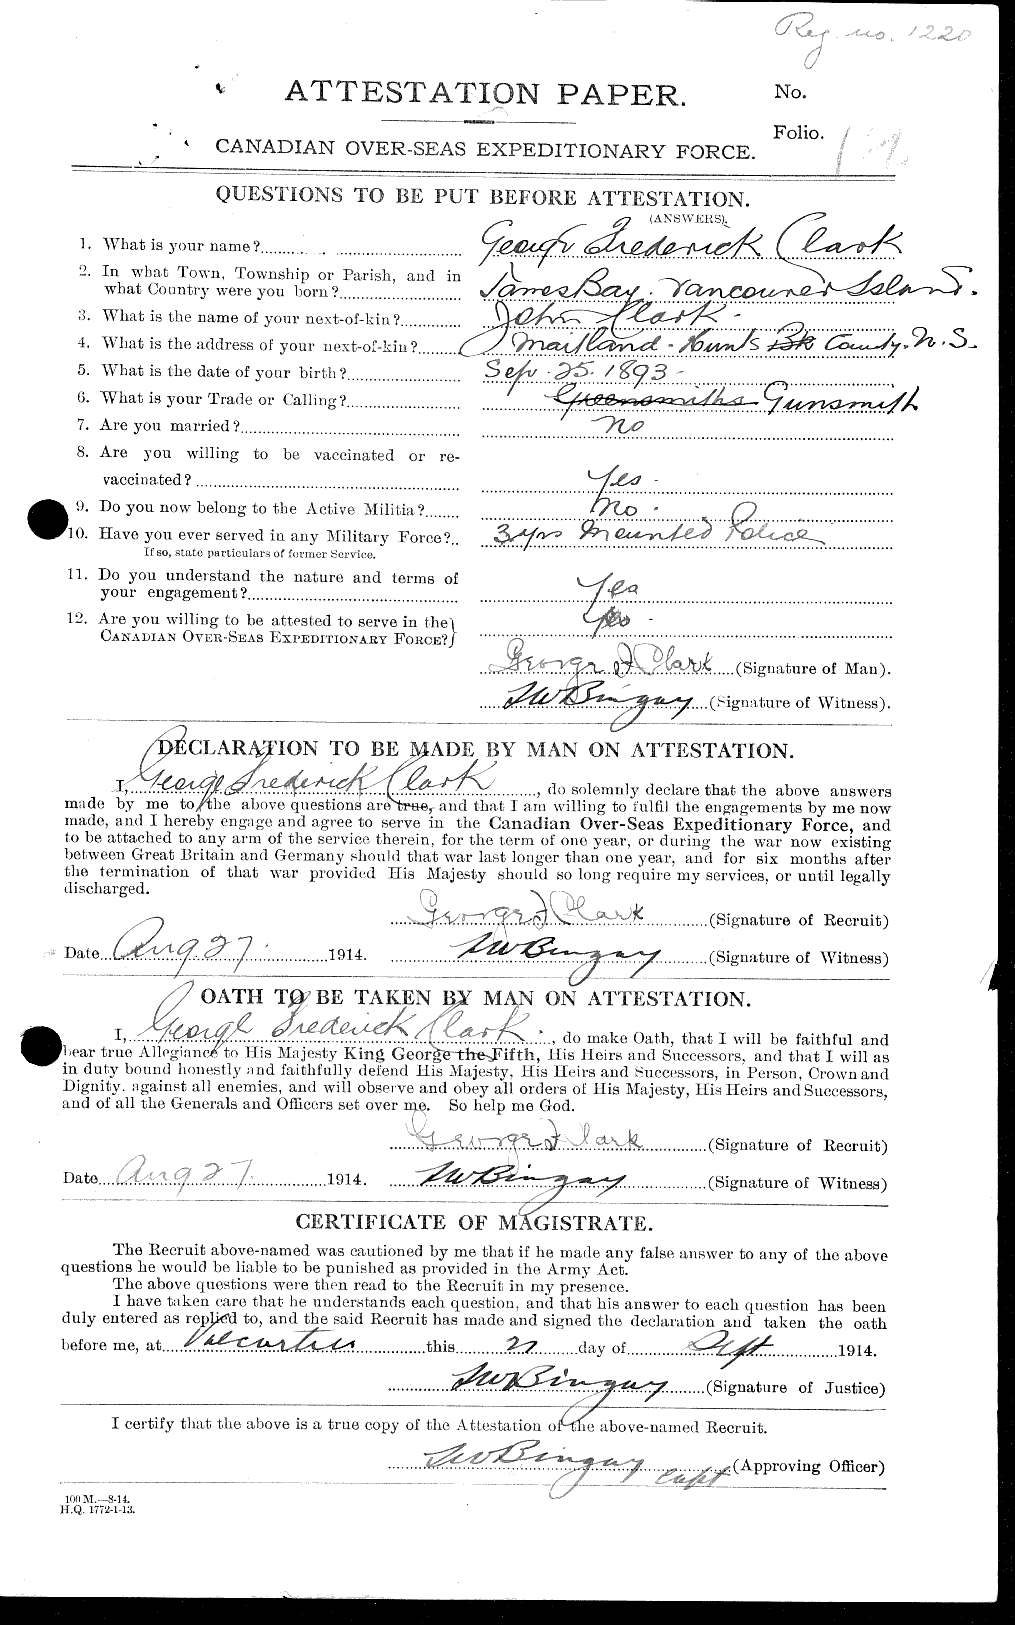 Personnel Records of the First World War - CEF 021053a